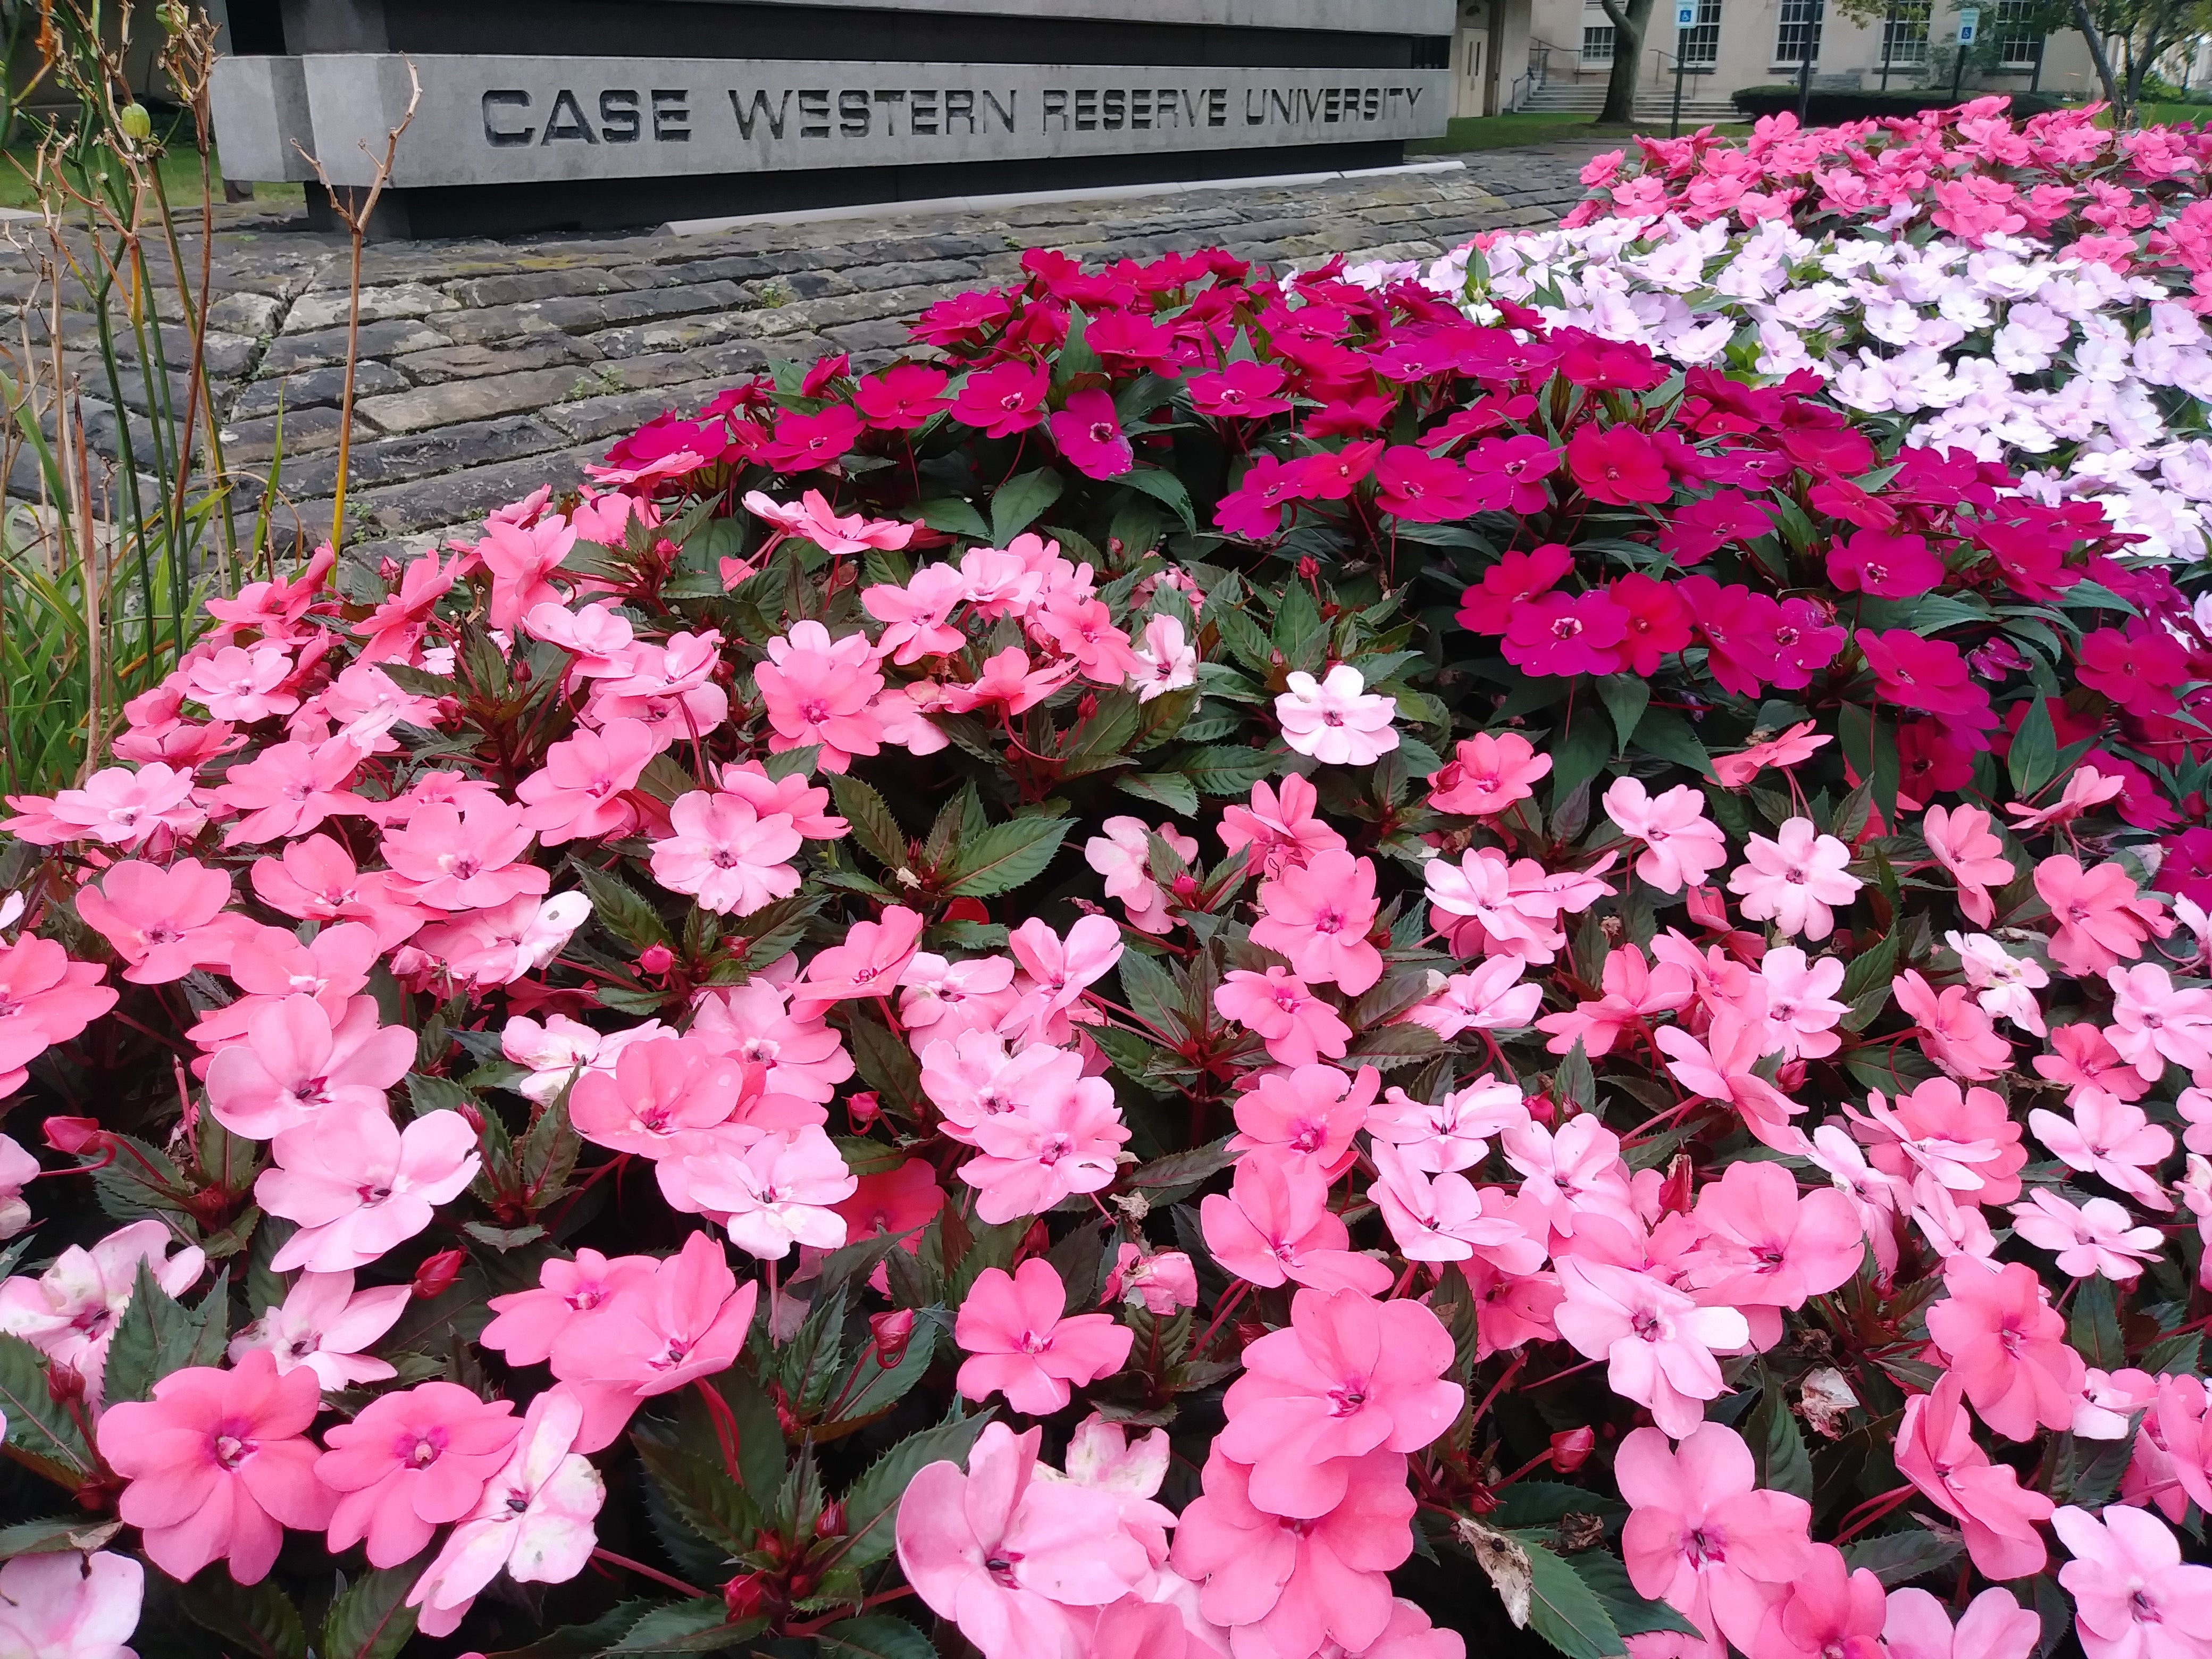 Flowers by the CWRU sign next to Crawford and Tomlinson Halls